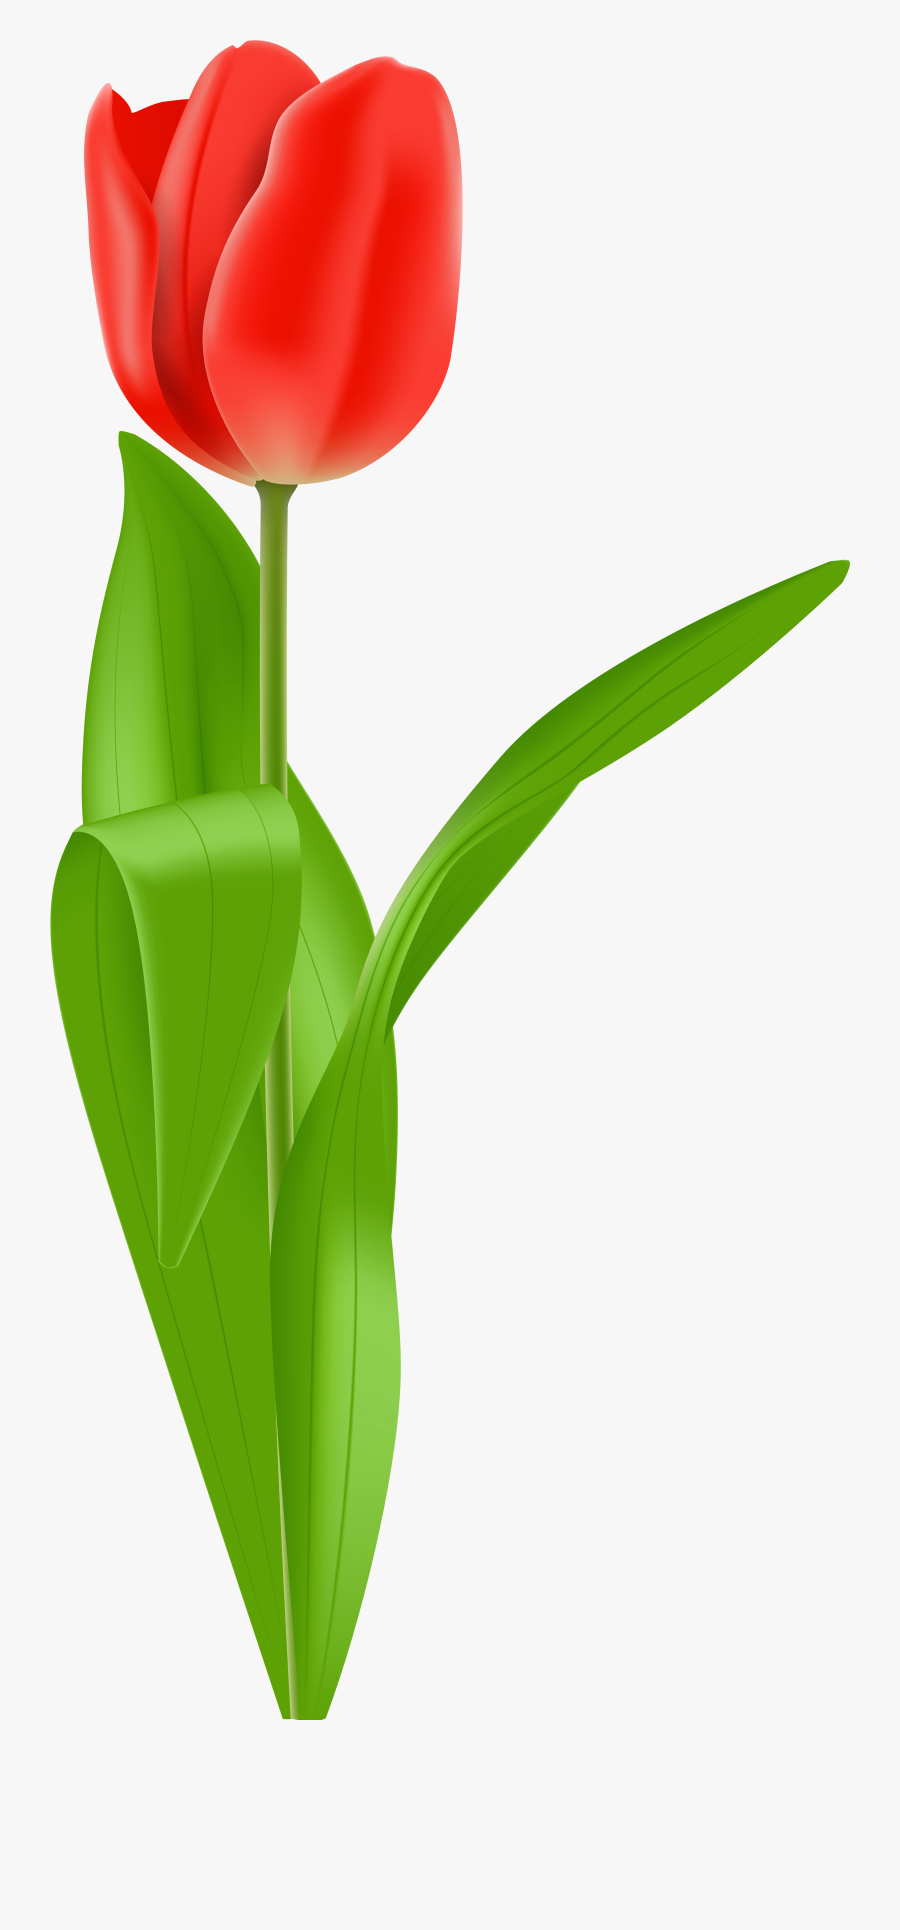 Red Tulip Png, Transparent Clipart